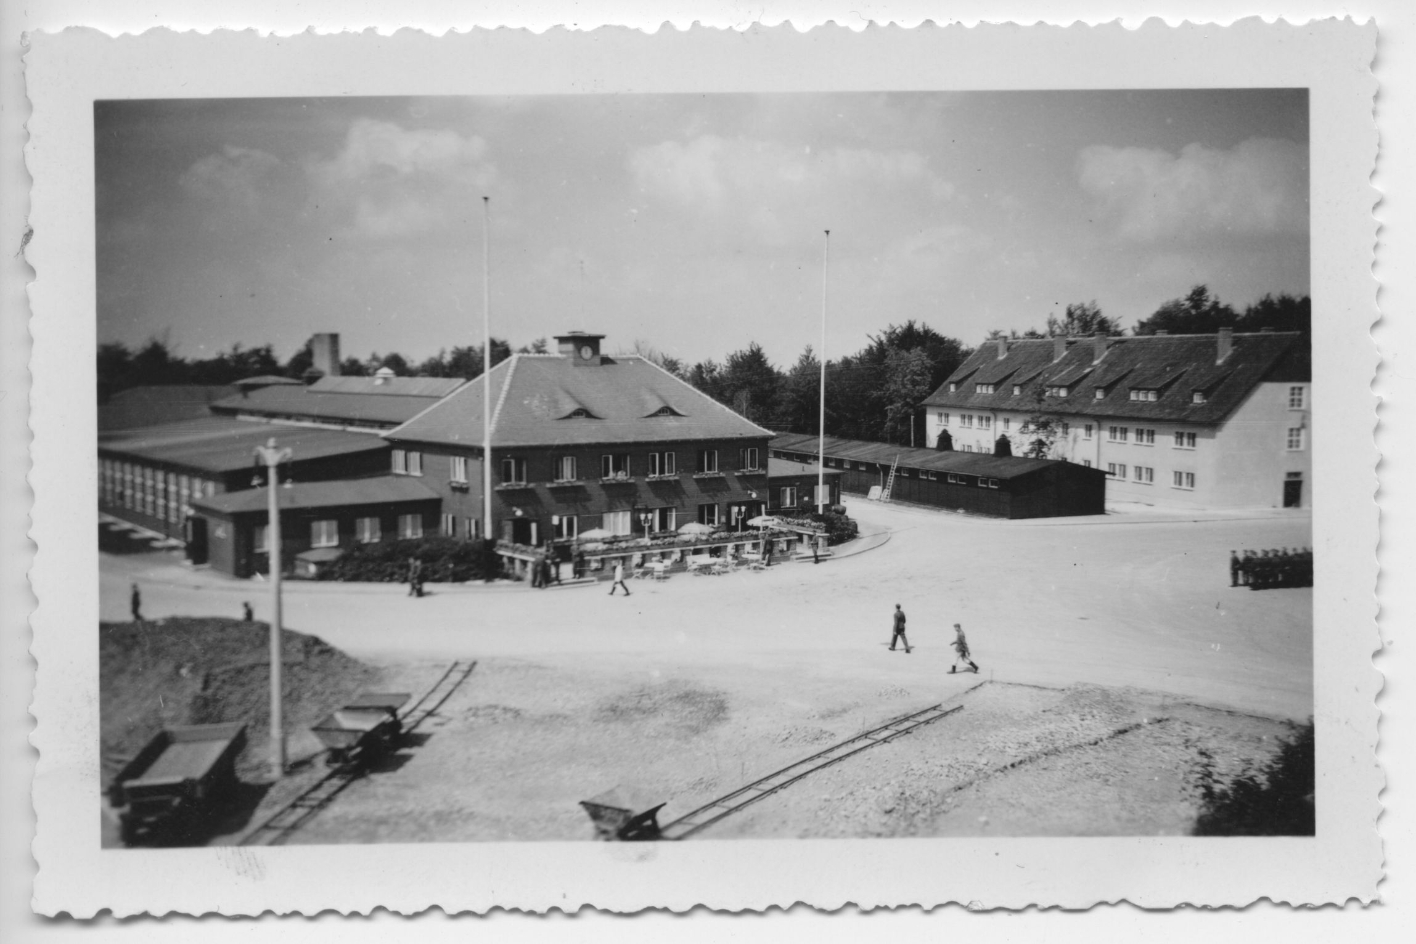 View over the parade ground to the SS casino. Occasionally SS men can be seen walking across the square. In the foreground 2 lorries on bills are recognizable.